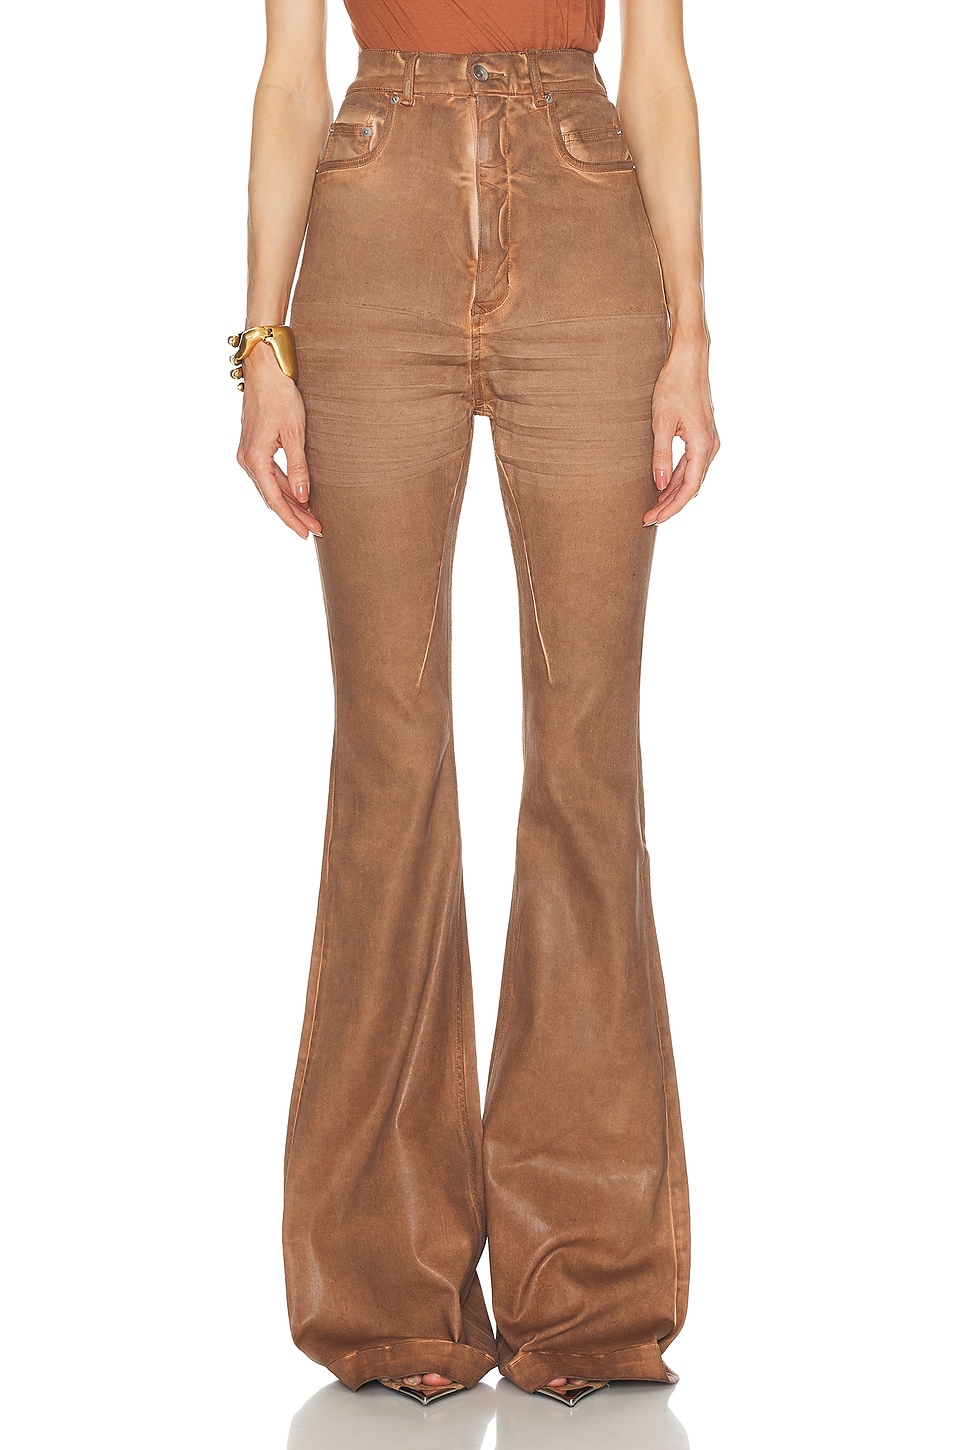 Image 1 of Rick Owens Bolan Bootcut Pant in Henna Brown